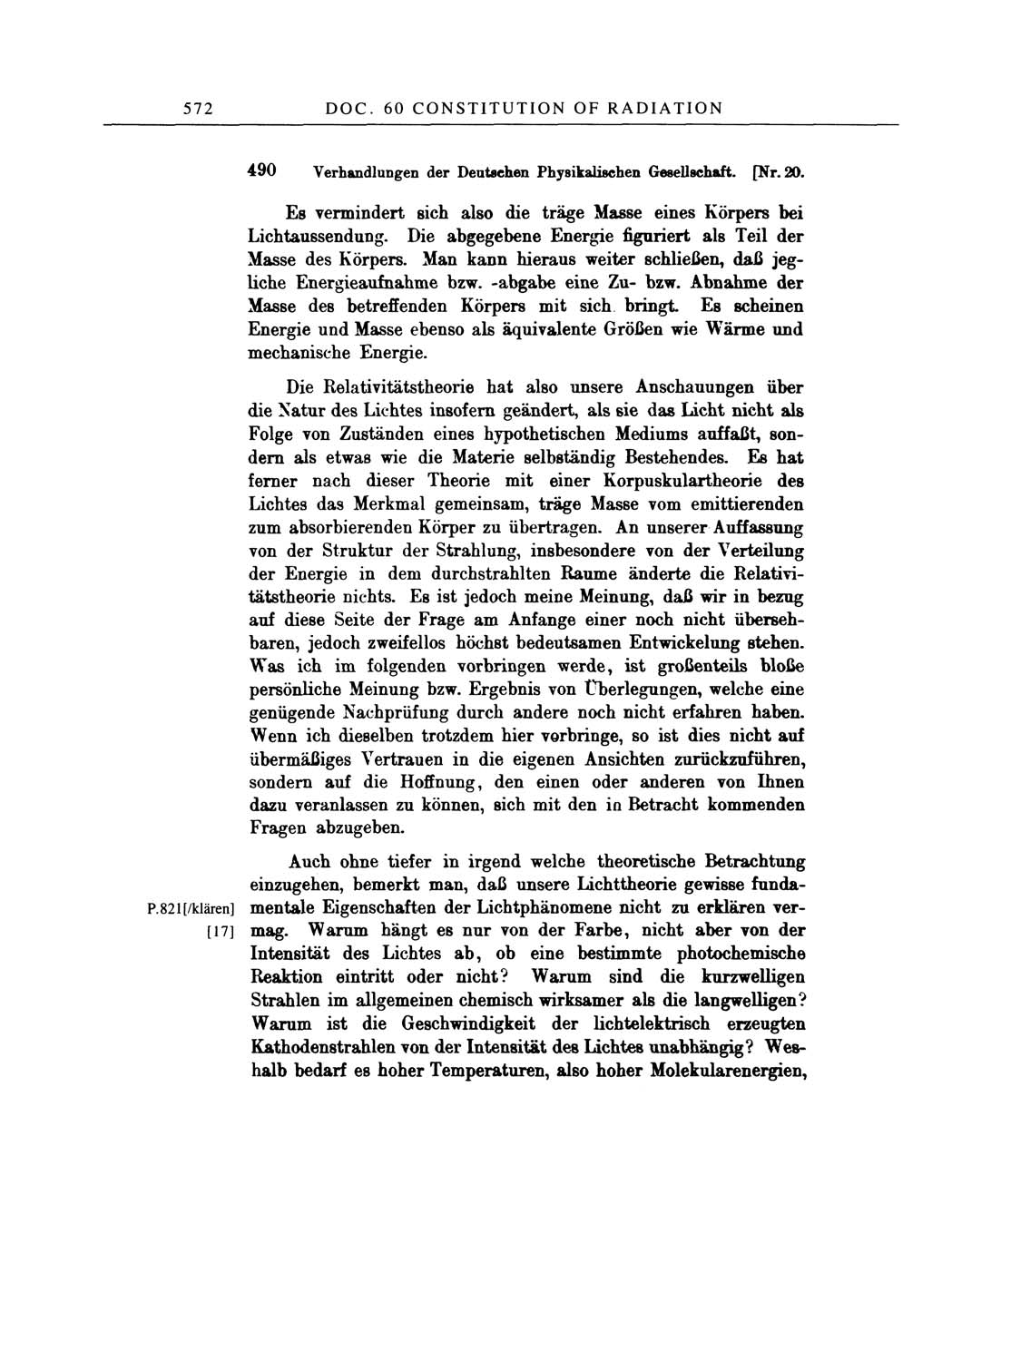 Volume 2: The Swiss Years: Writings, 1900-1909 page 572